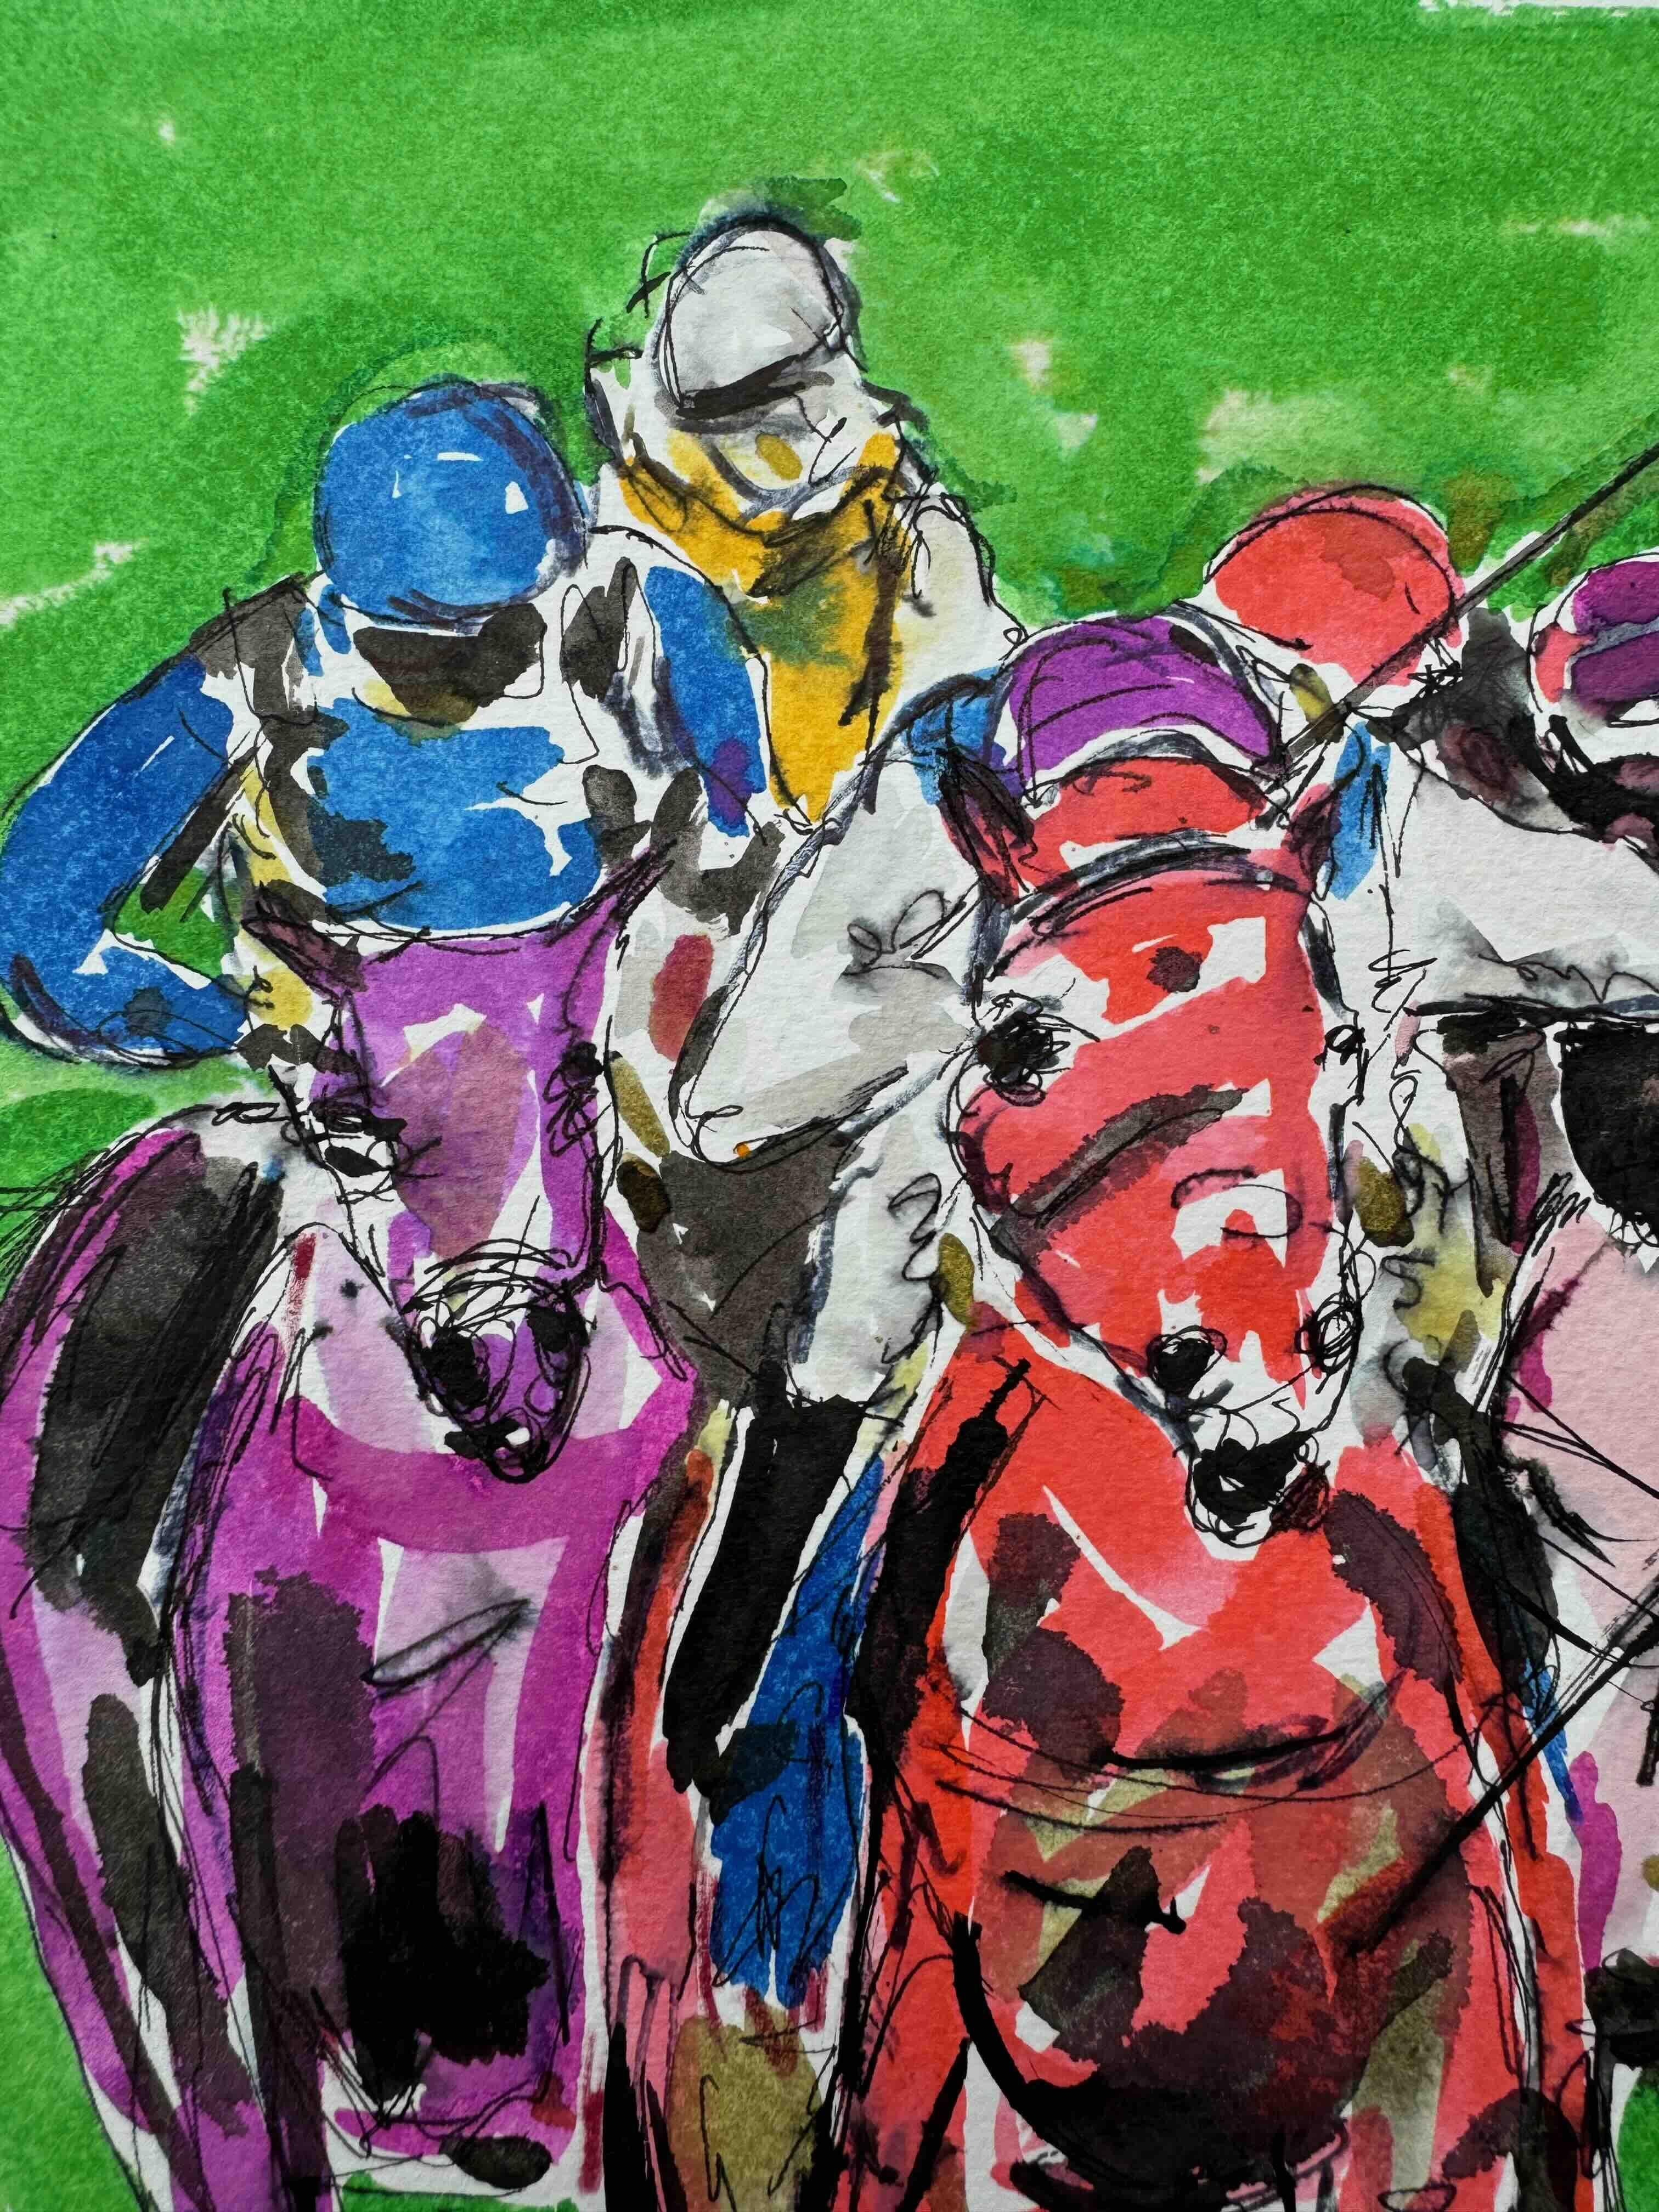 An original painting by Garth Bayley. Pen, watercolour and ink painting of the horses racing.

ADDITIONAL INFORMATION:
Scratch my Back by Garth Bayley [2023]
Original painting
Pen, watercolour and ink painting on watercolour paper
Signed by